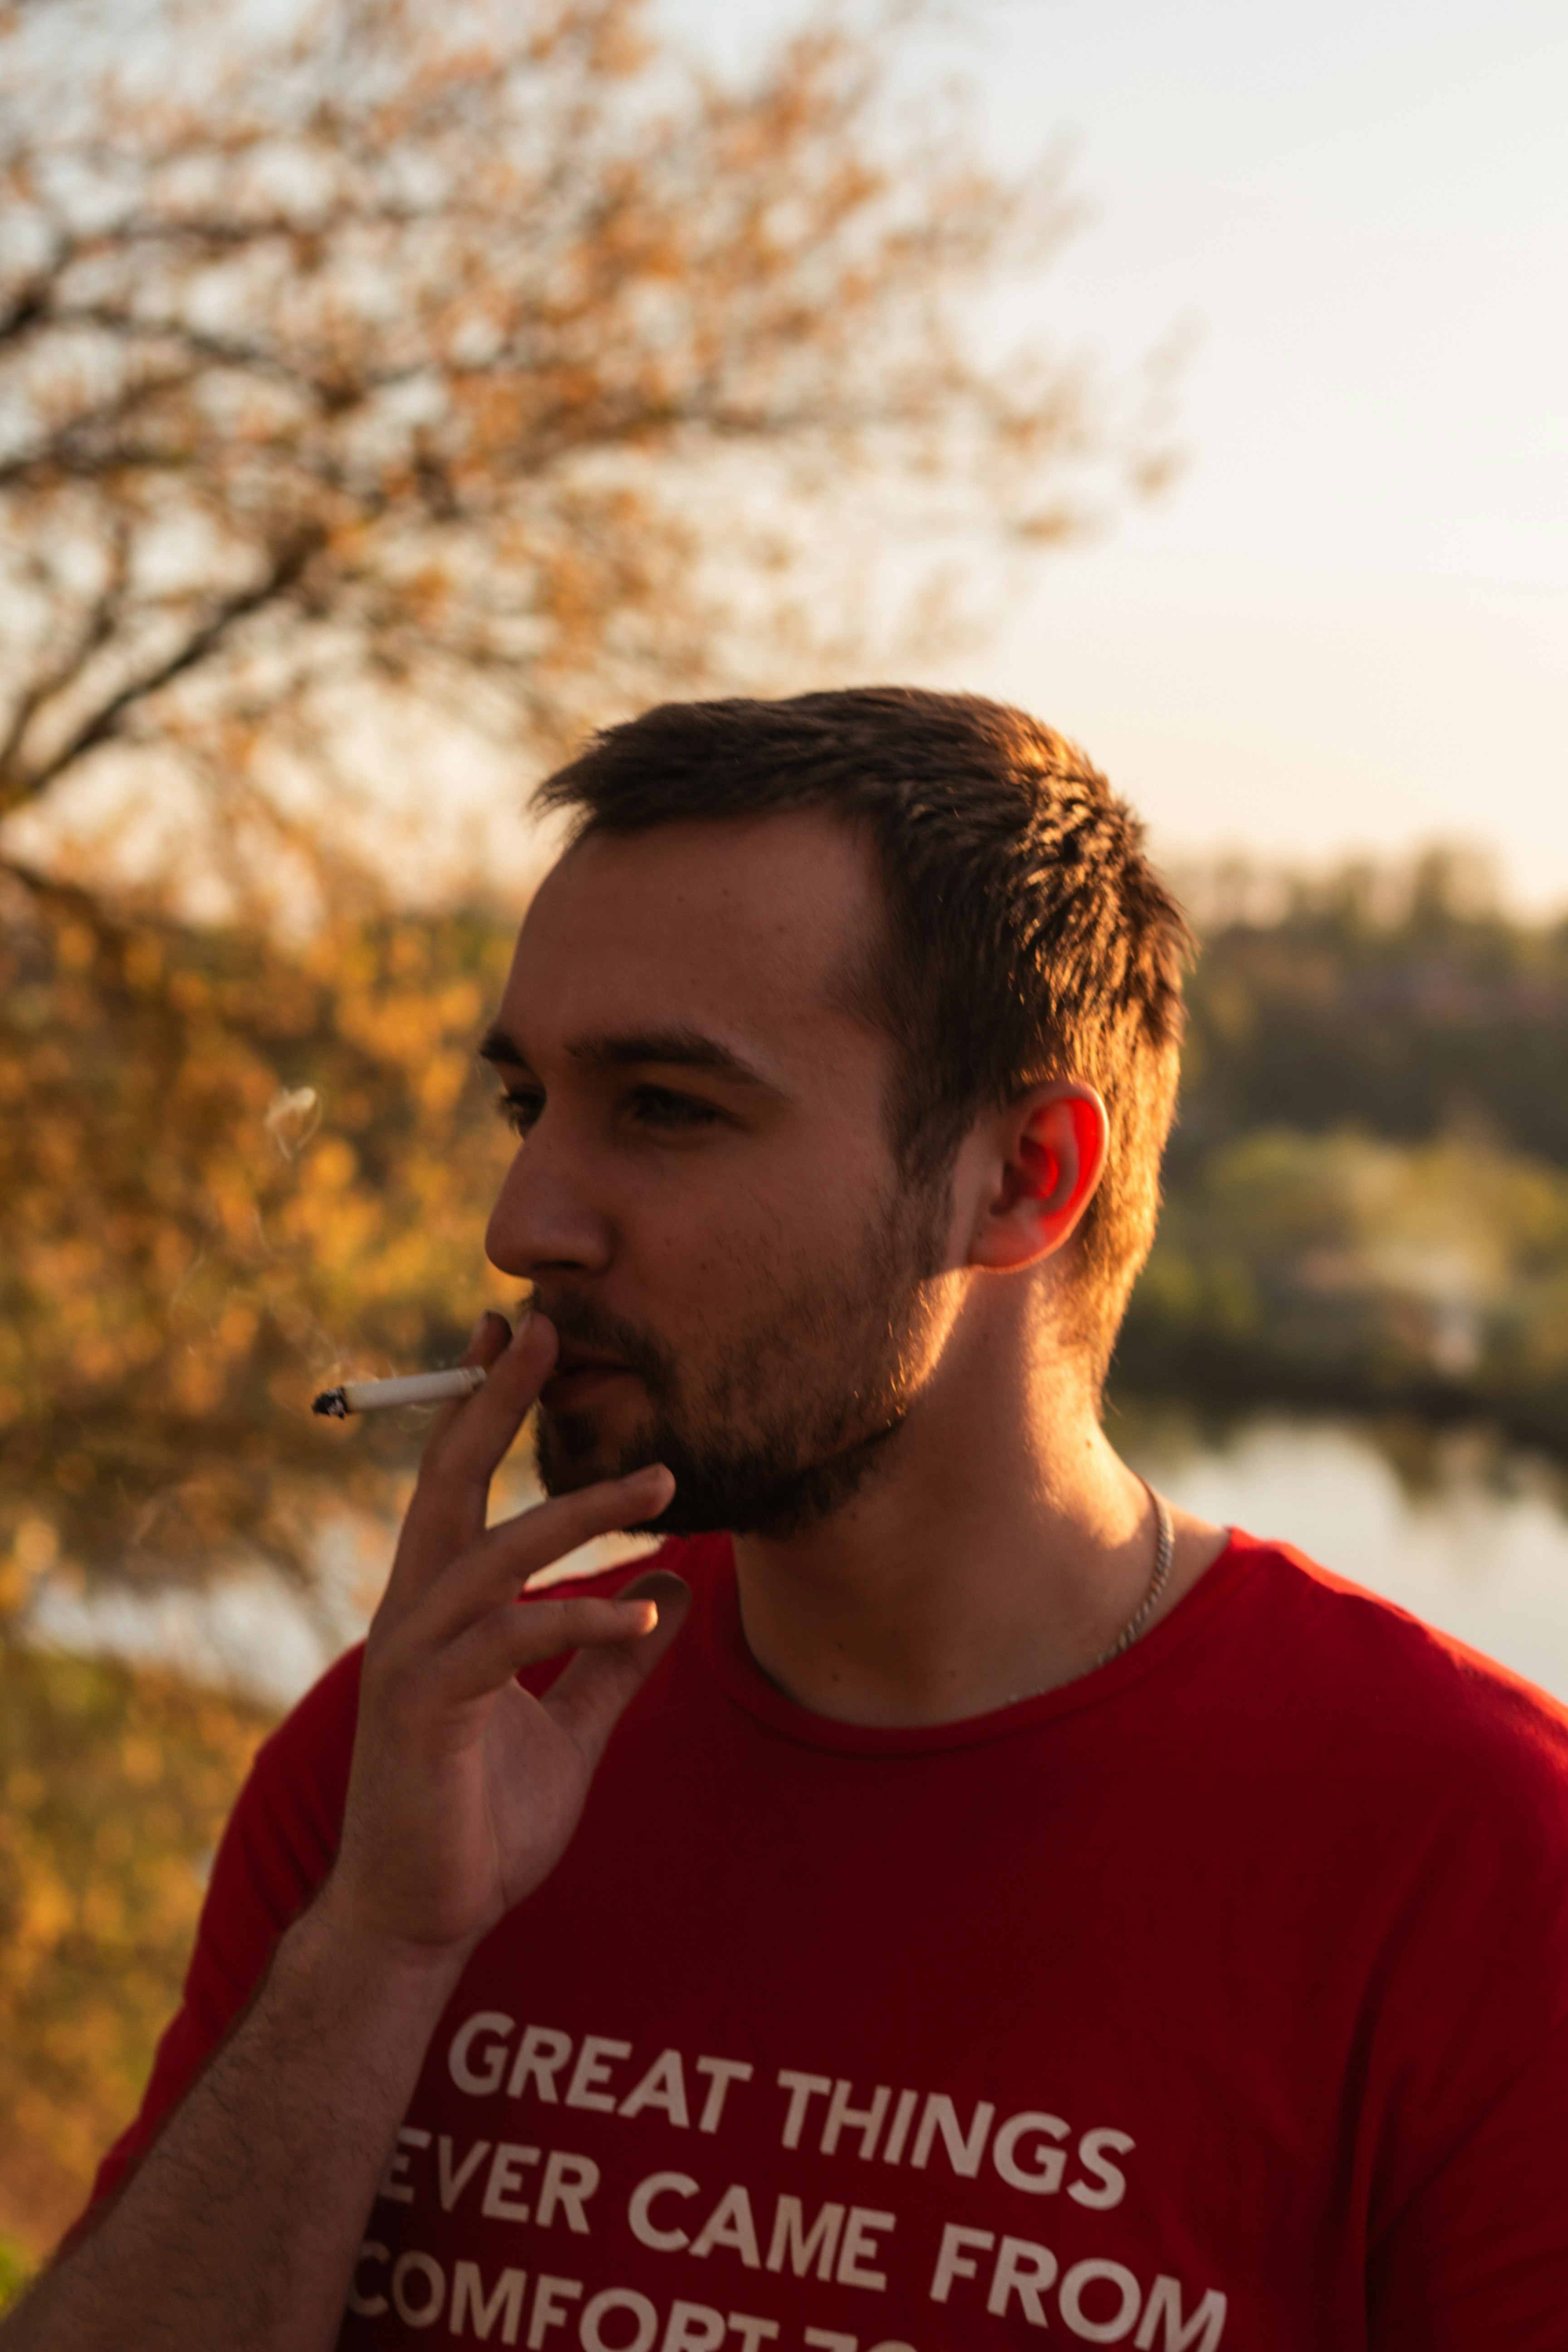 man standing smoking cigarette near body of water and trees